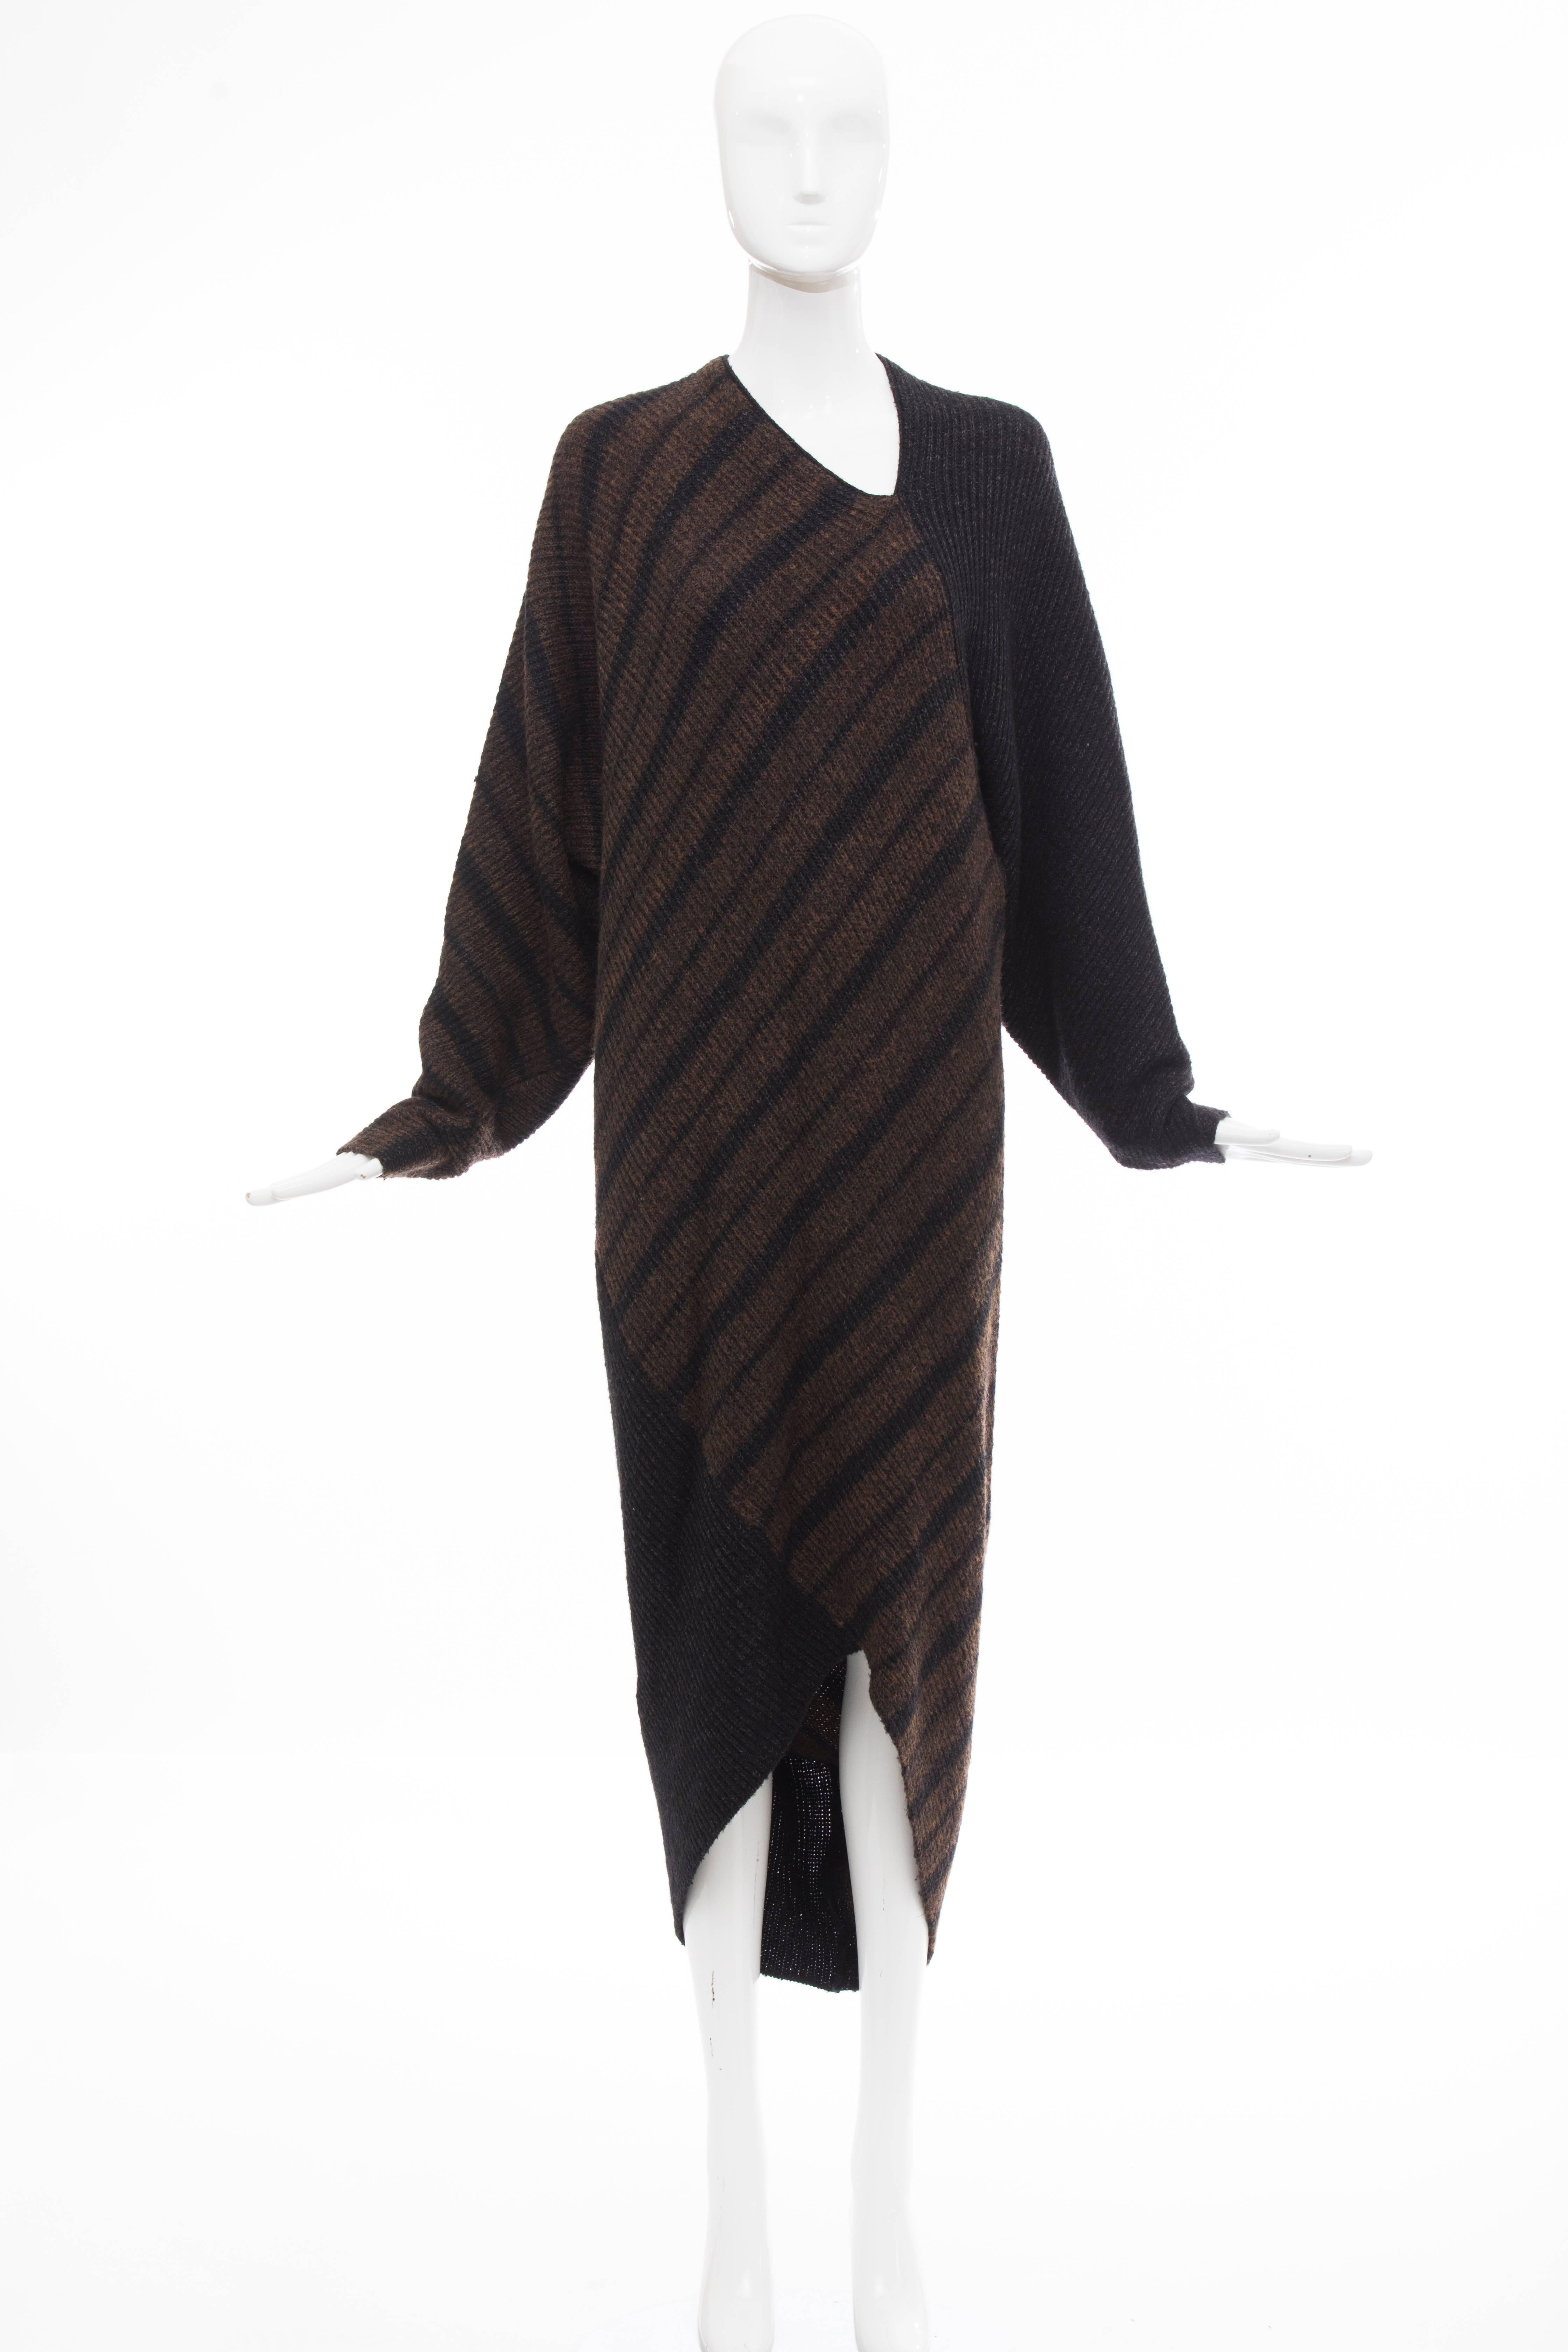 Women's Issey Miyake Striped Wool Sweater Dress Cocoon Cardigan Ensemble, Circa 1970s For Sale